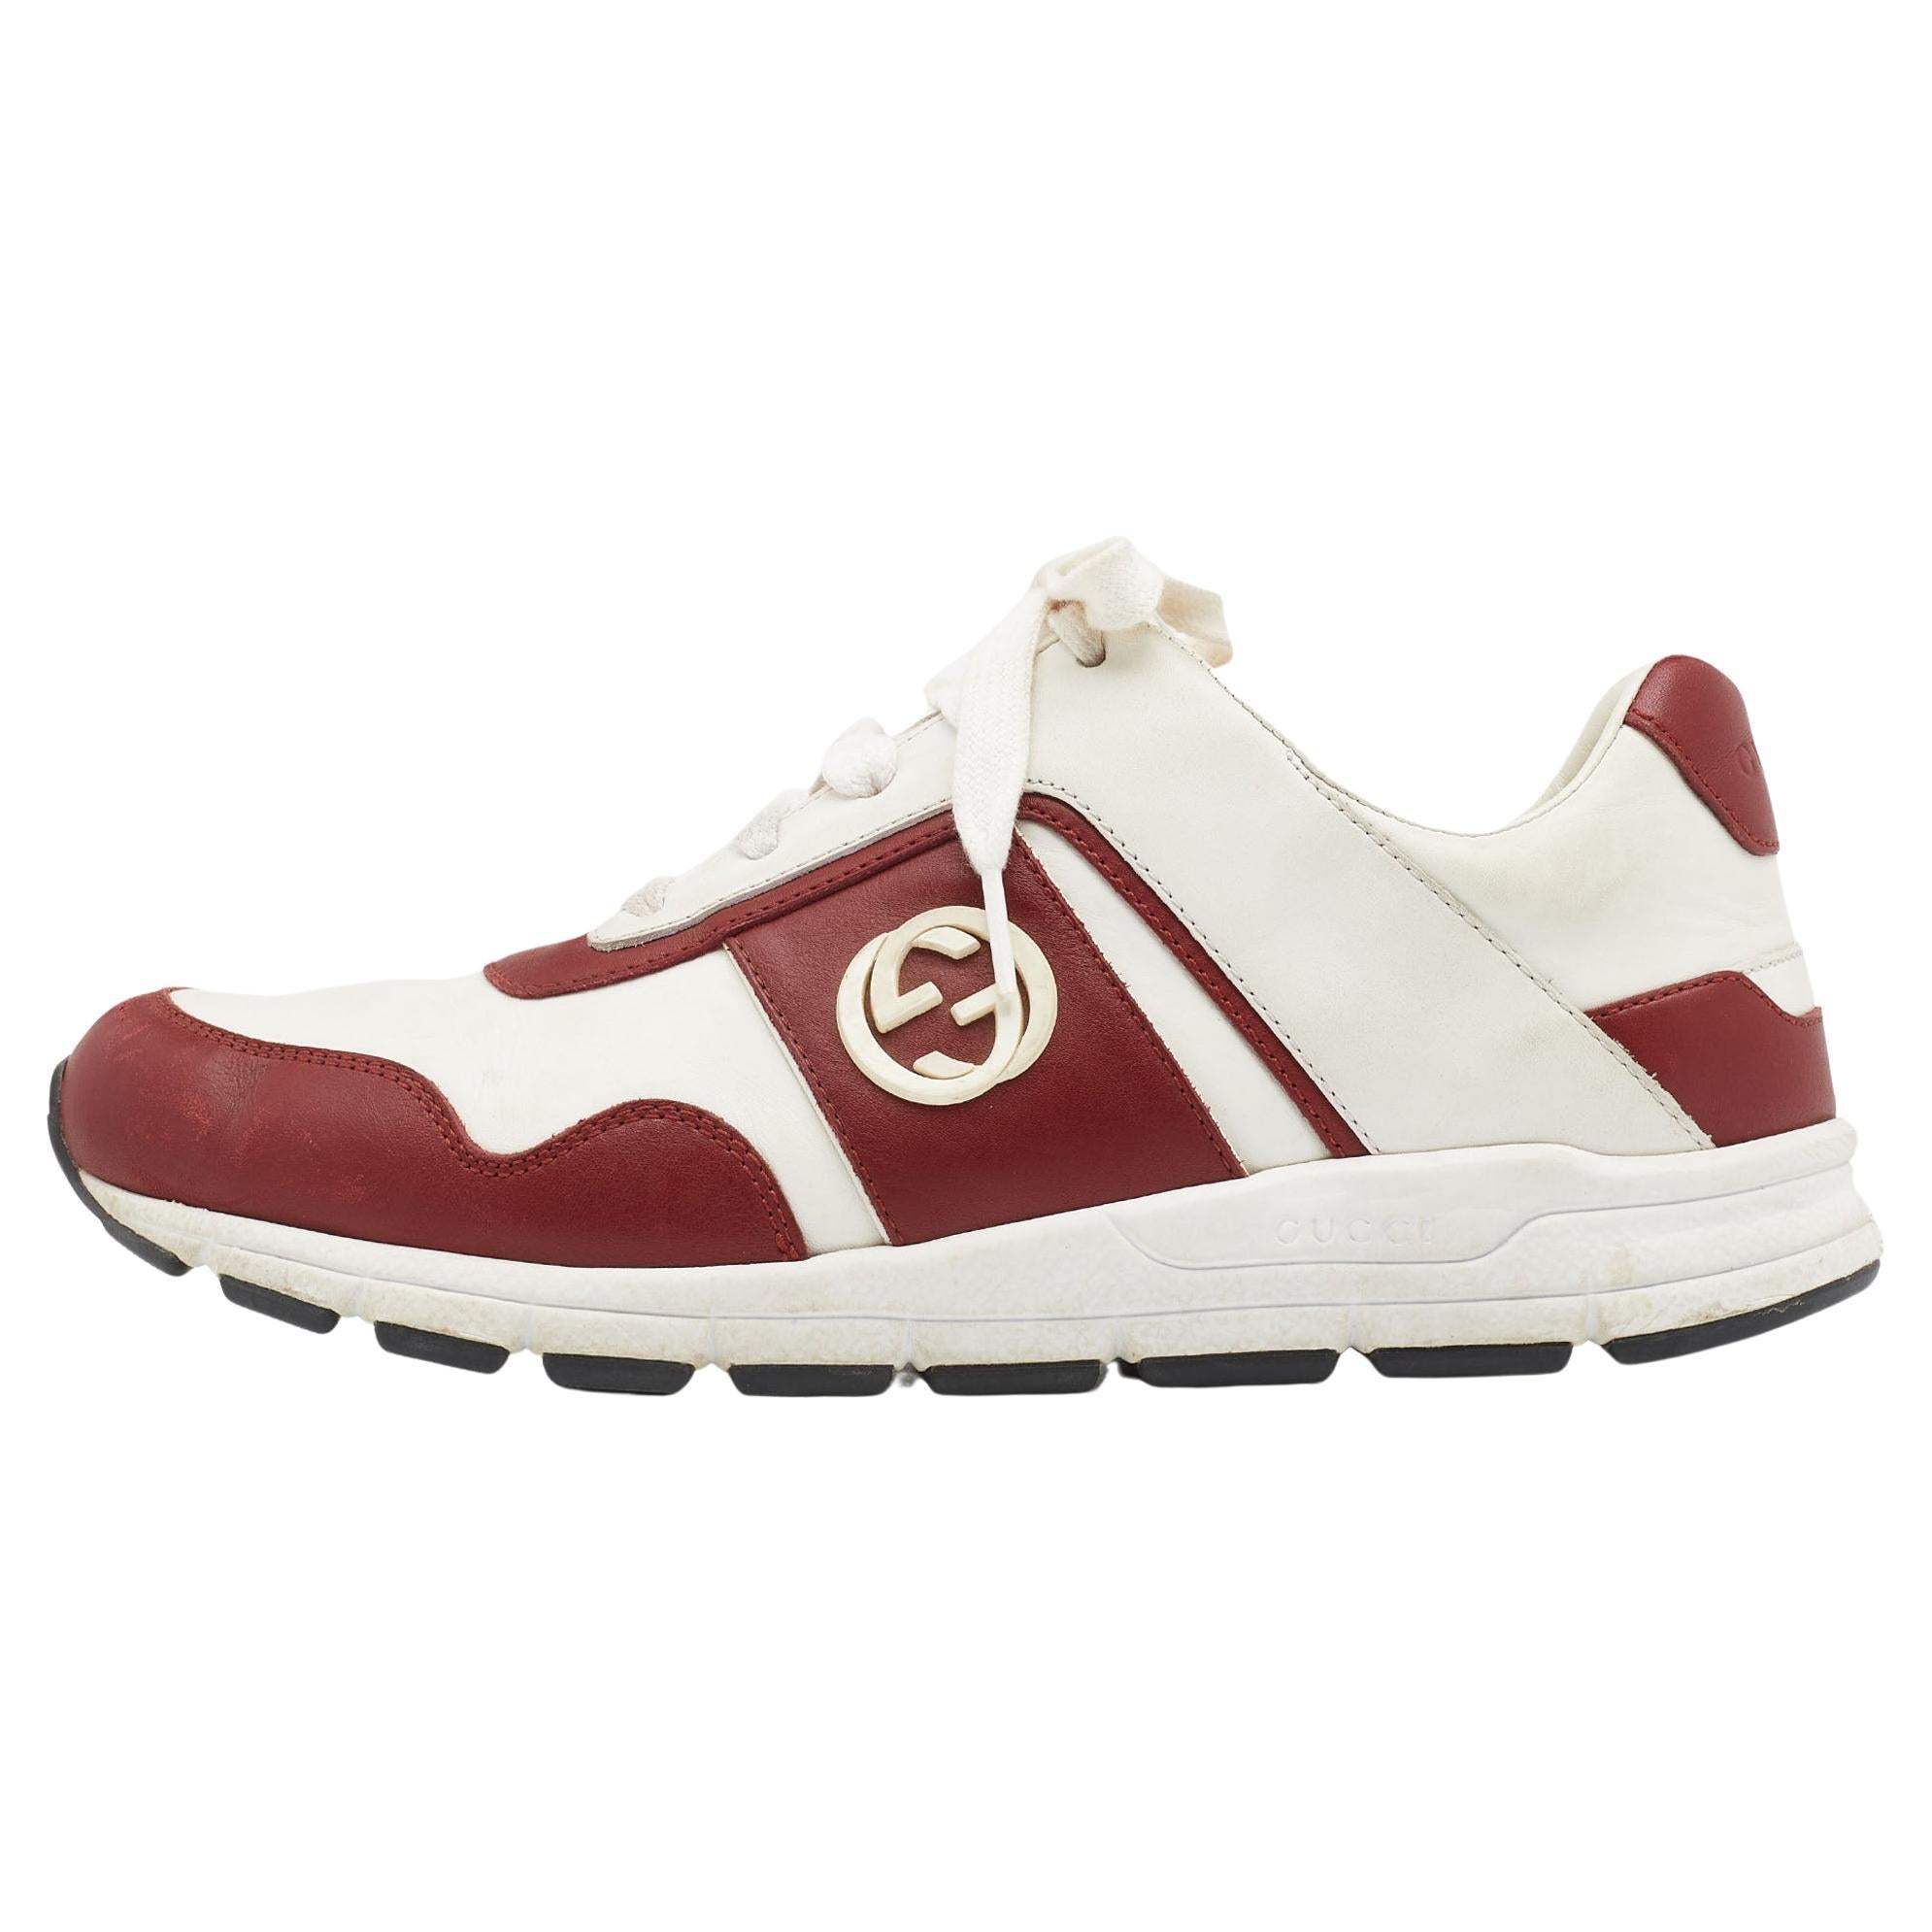 Gucci Red/White Leather Interlocking G Low Top Sneakers Size 37.5